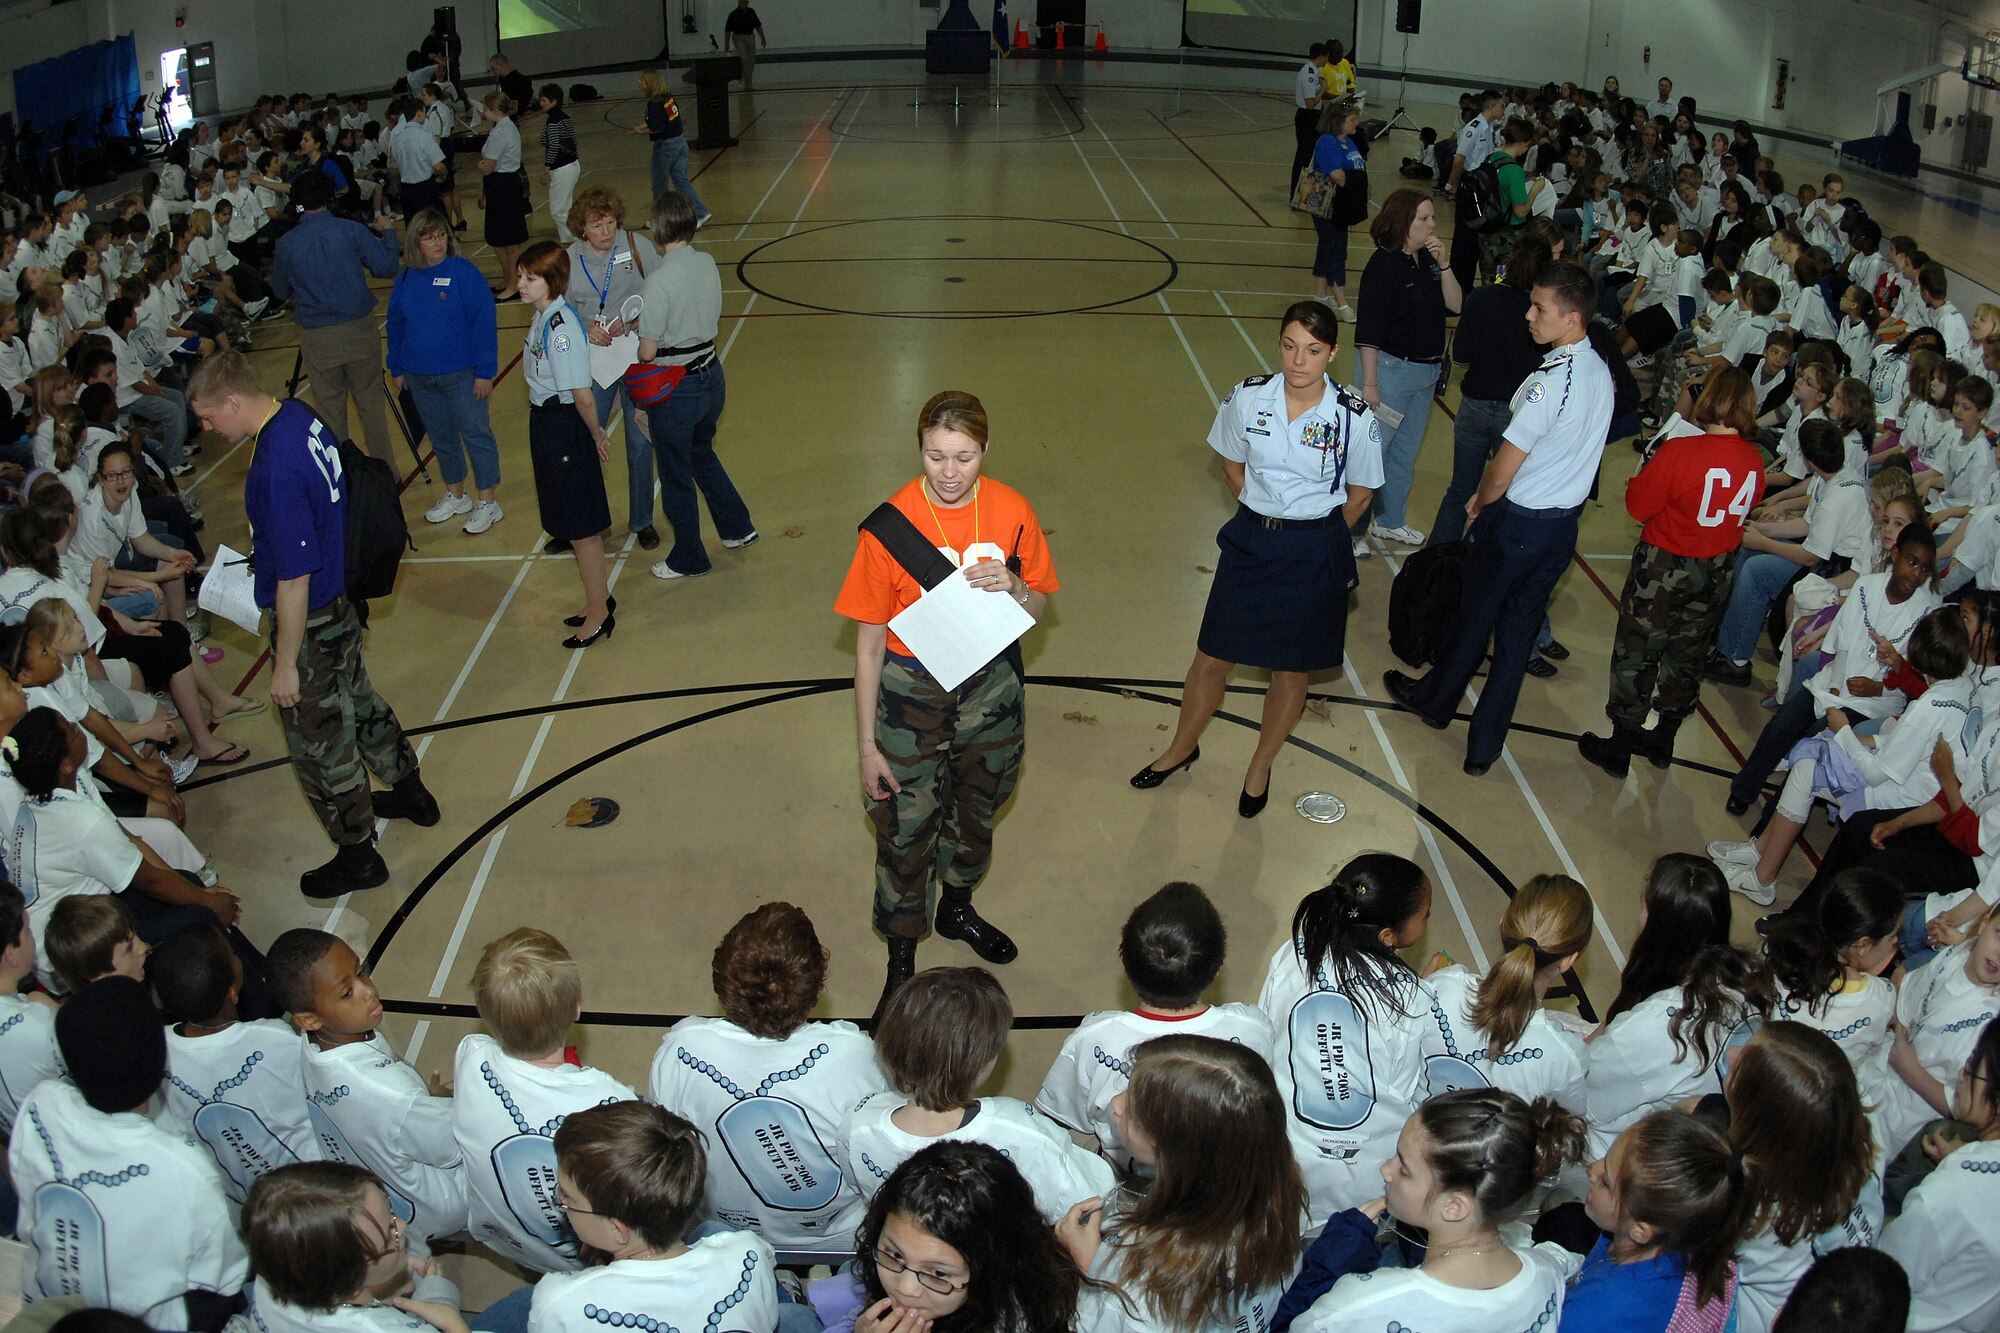 Airman 1st Class Cheryl Hom (orange shirt), an imagery analyst from the 20th Intelligence Squadron, briefs her group of students as they prepare to process through a mobility line. (U.S. Air Force Photo By/Josh Plueger) 